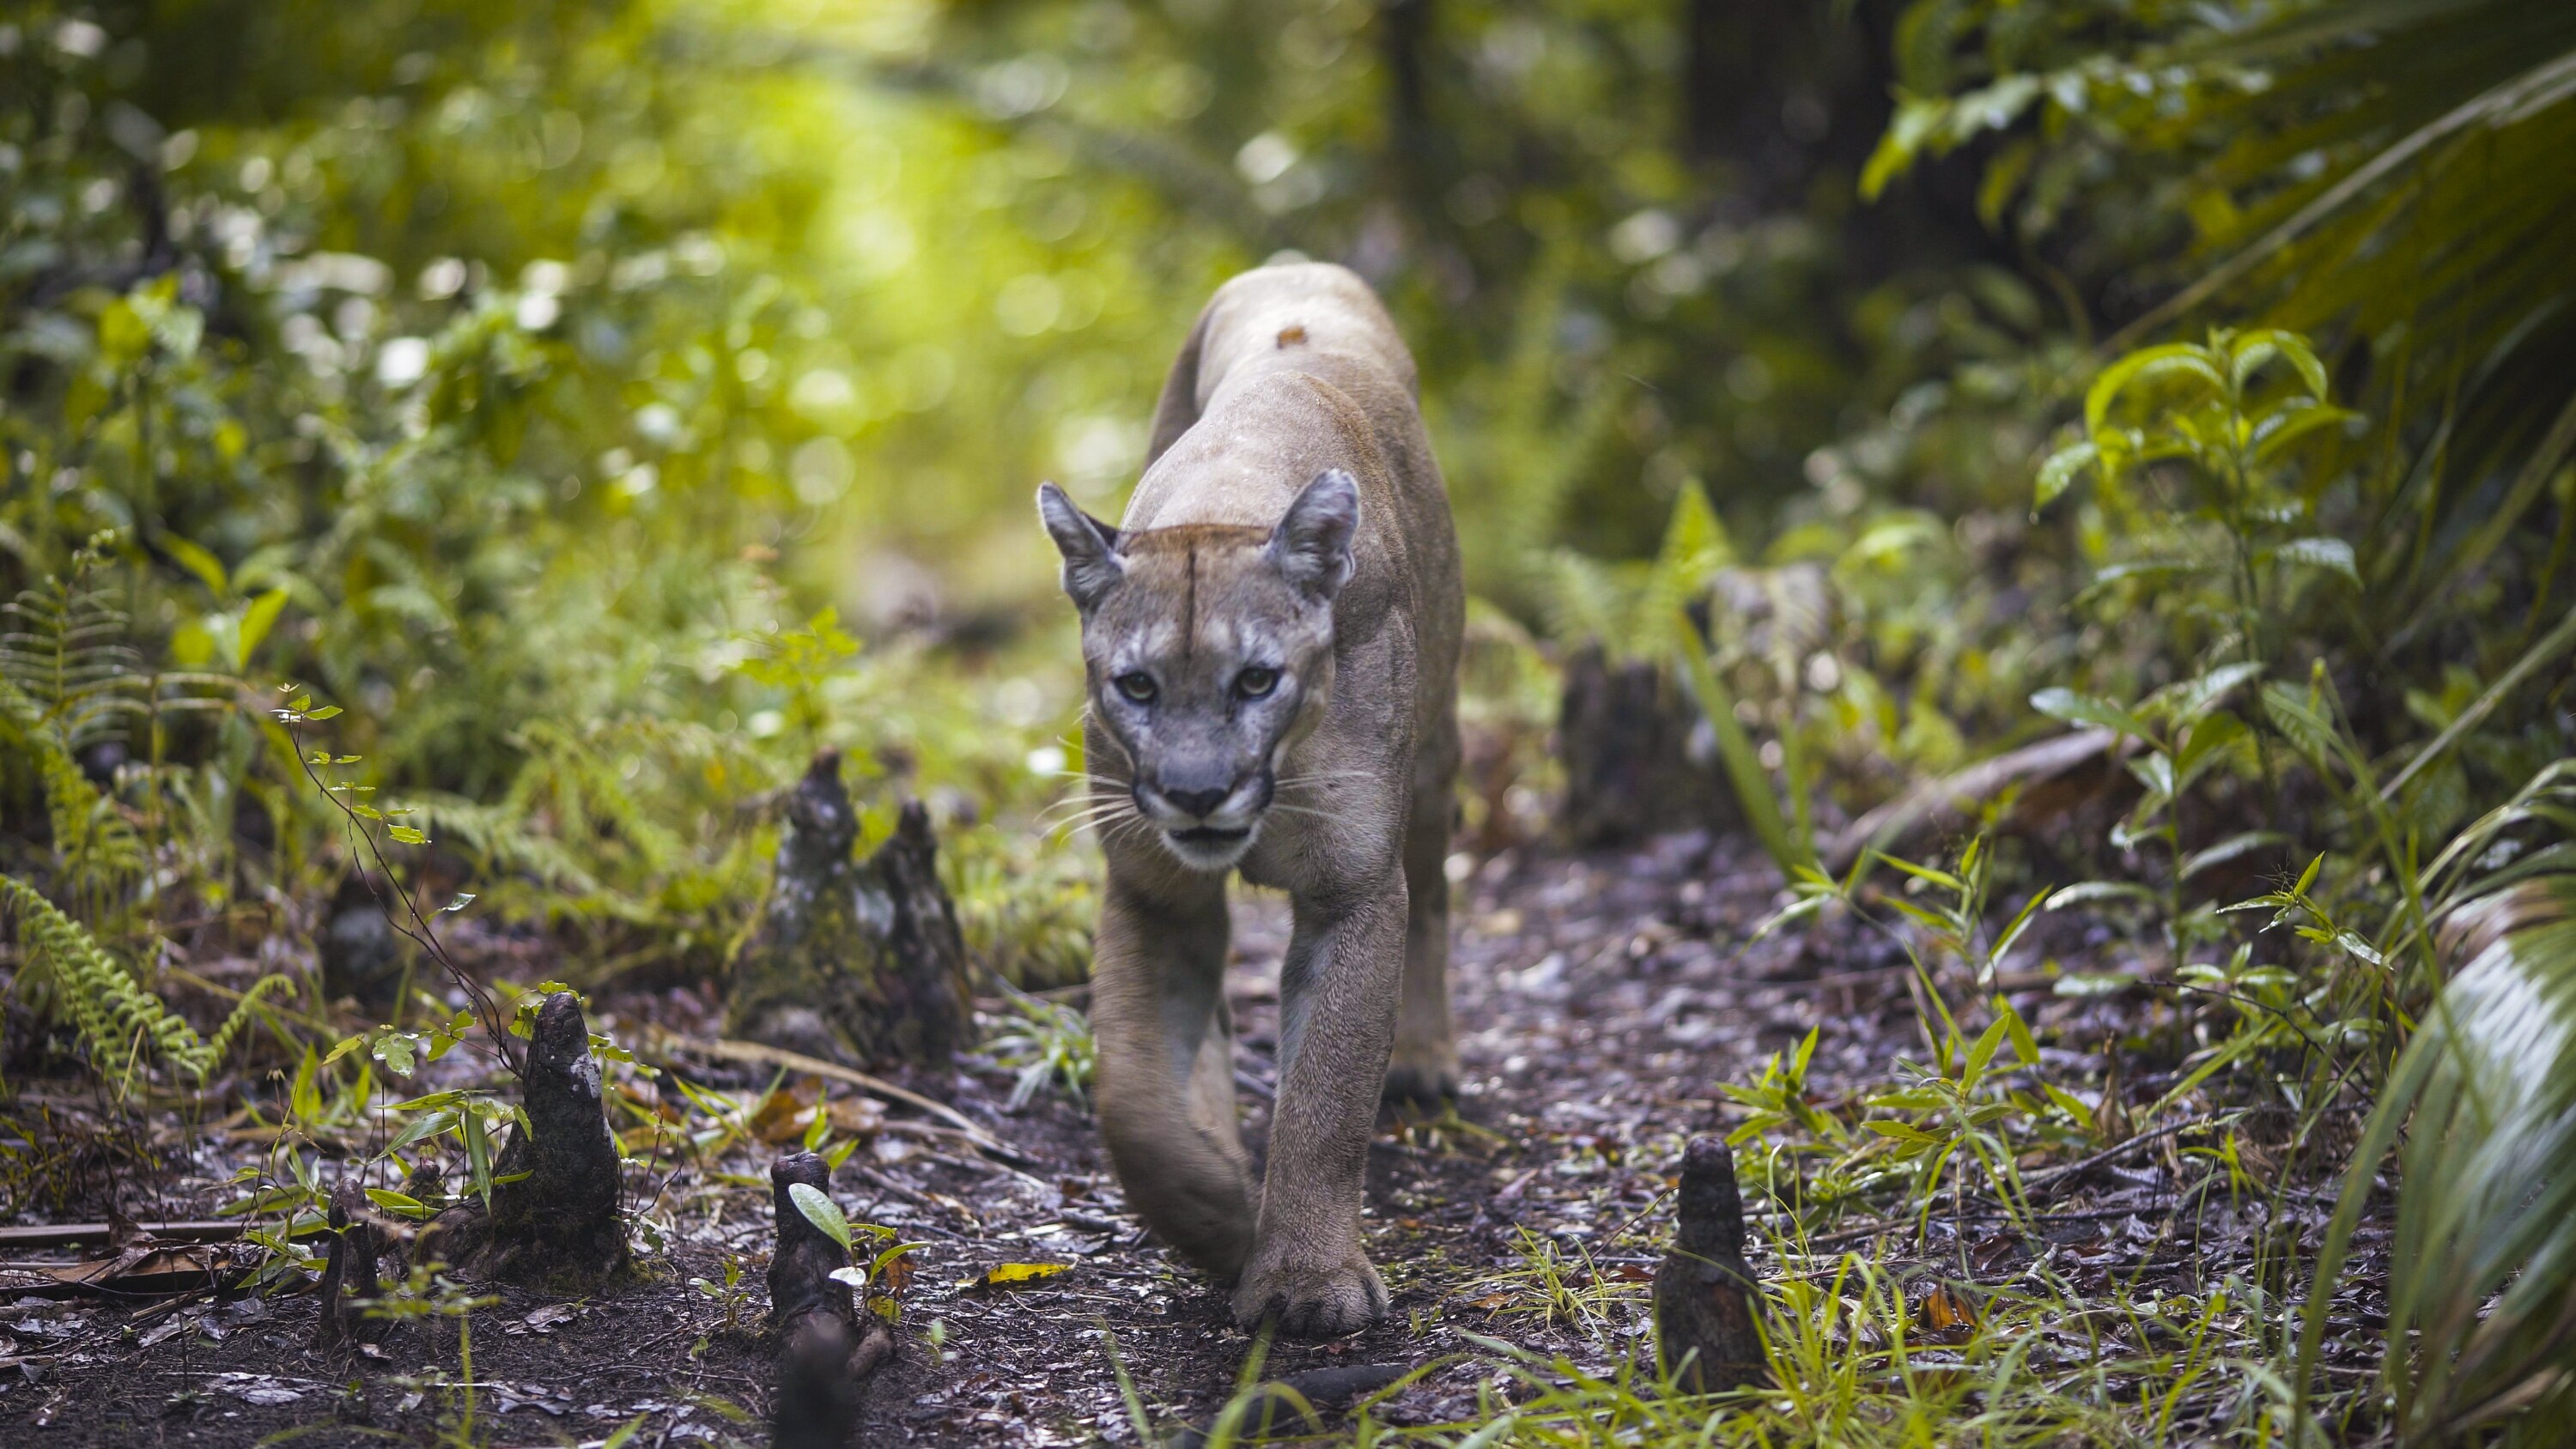 The Florida panther is one of the most rare mammals in the world. (National Geographic for Disney+)